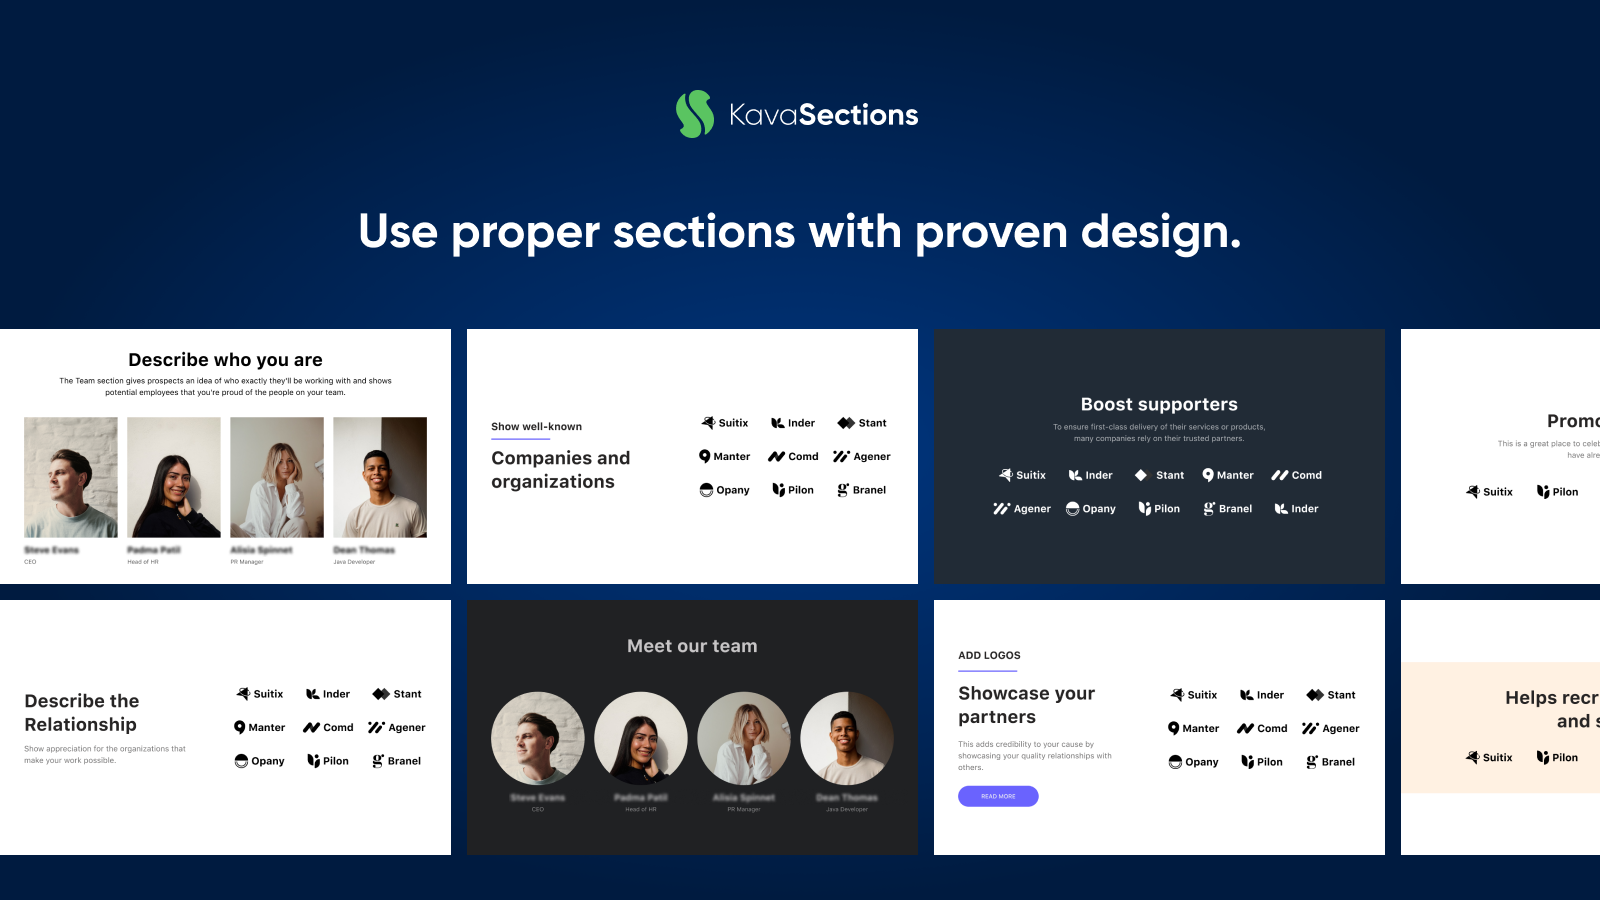 Use proper sections with proven design.